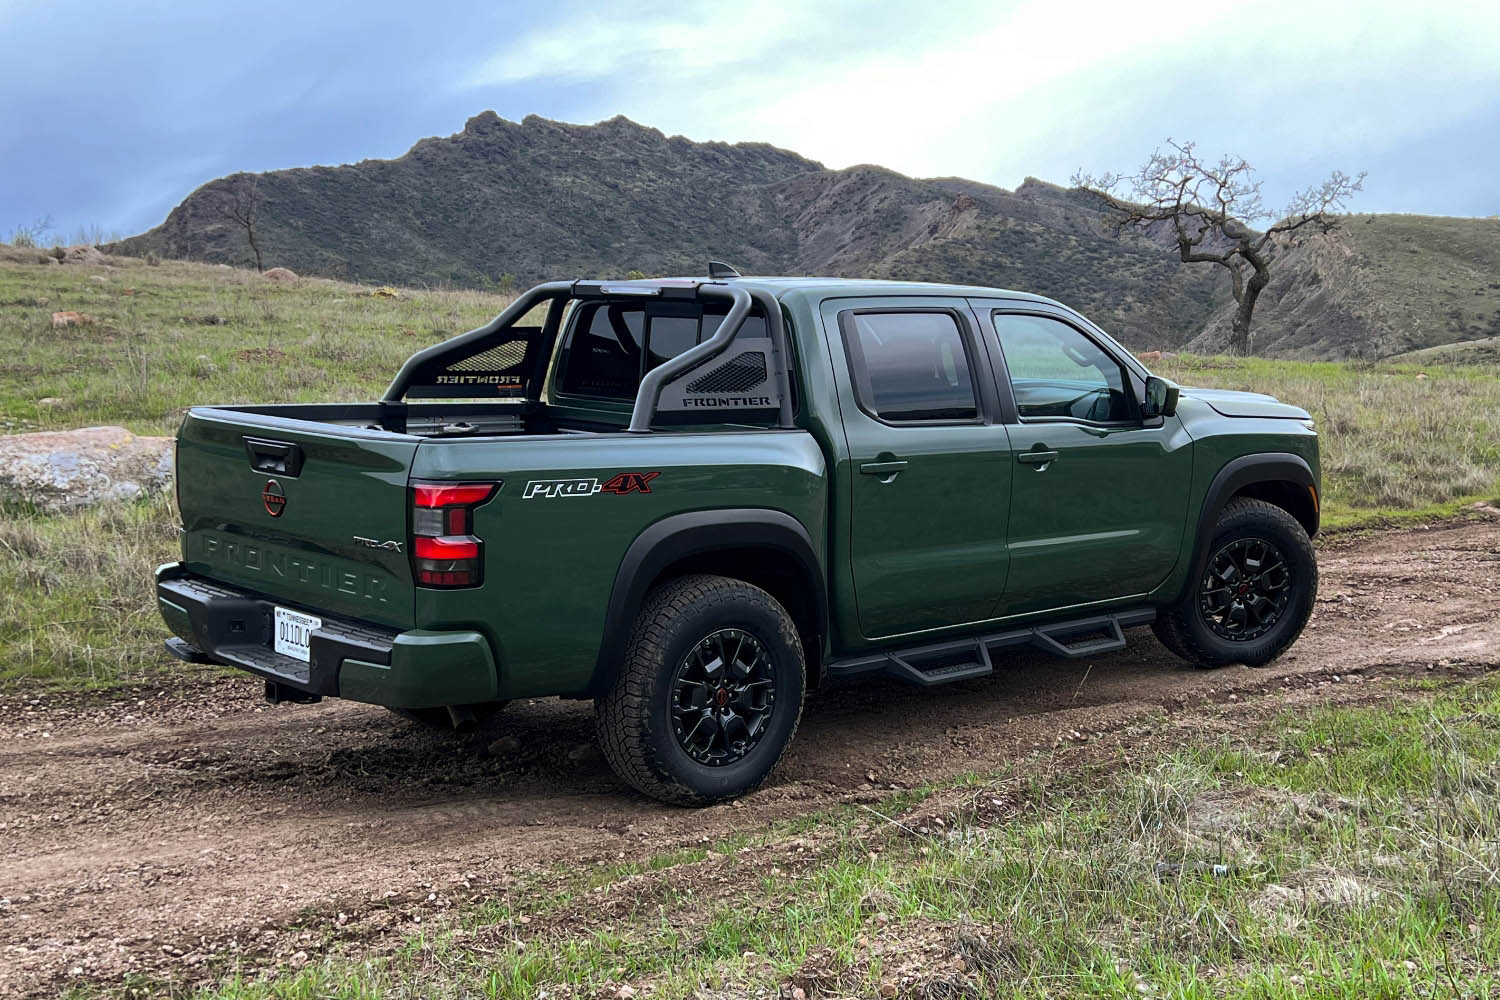 2022 Nissan Frontier Pro-4X, Tactical Green, rear-quarter right